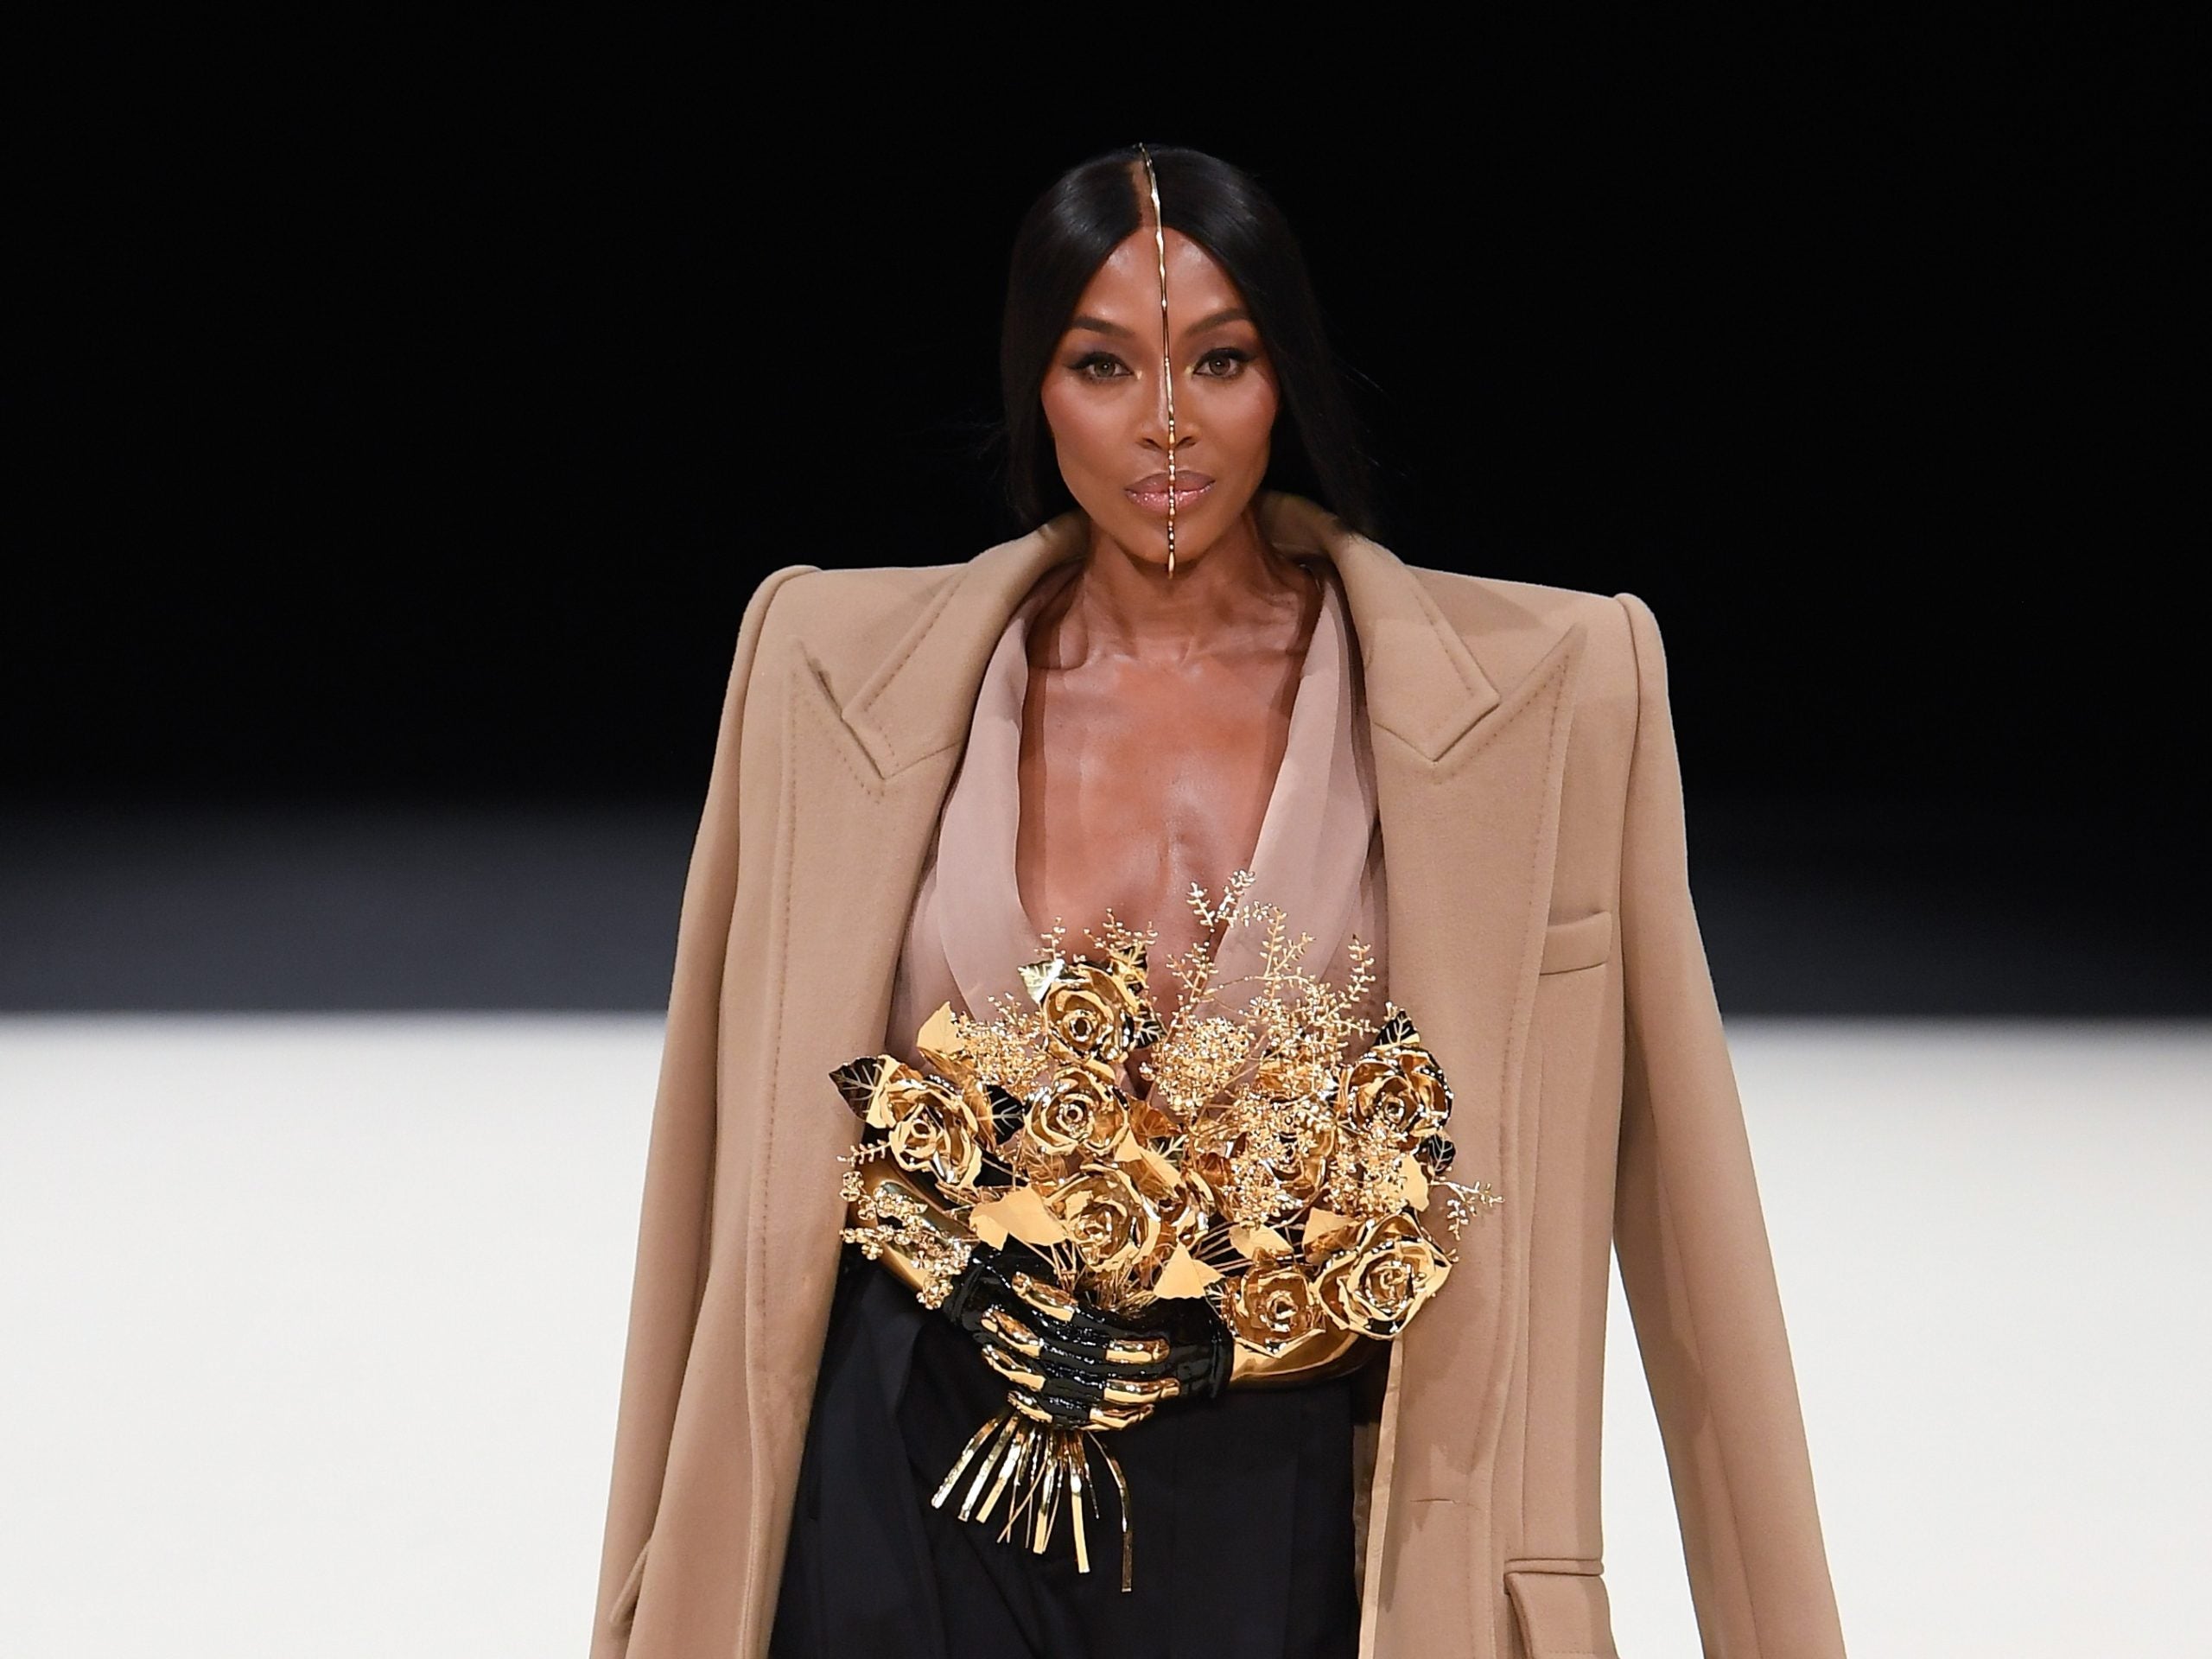 In Case You Missed It: Naomi Campbell Closes The Balmain Runway Show, And More